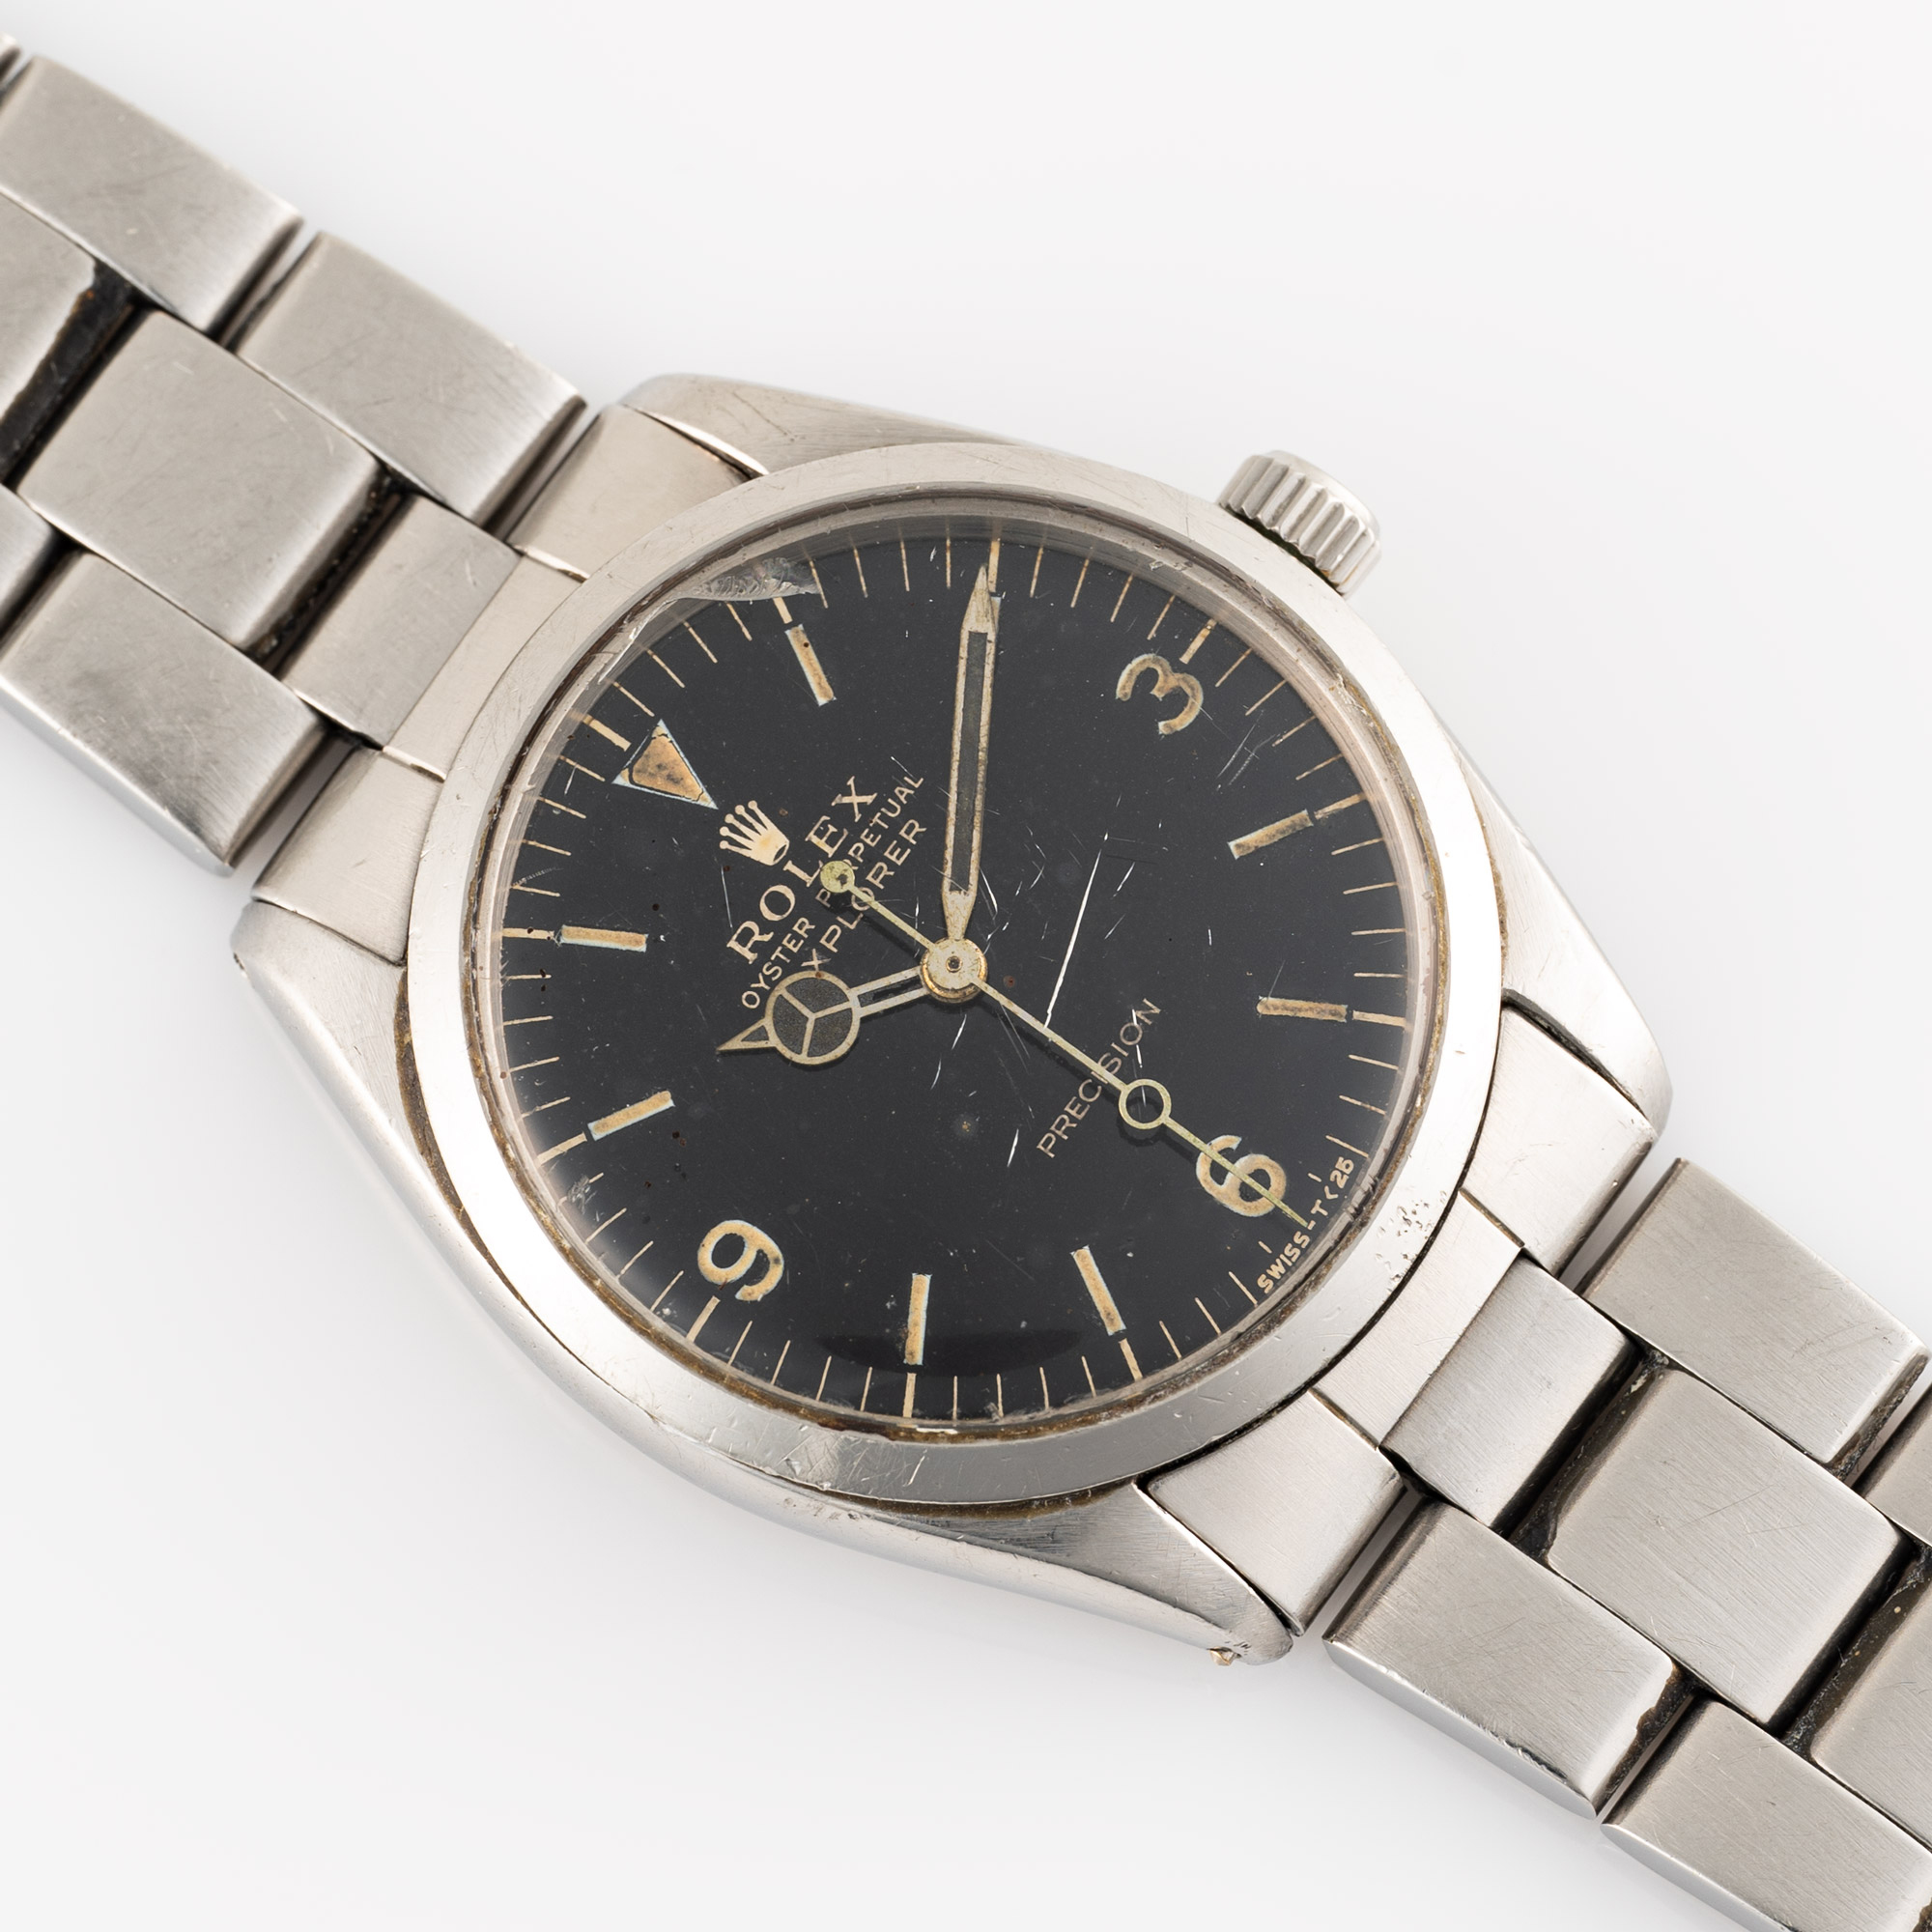 A GENTLEMAN'S SIZE STAINLESS STEEL ROLEX OYSTER PERPETUAL EXPLORER PRECISION BRACELET WATCH CIRCA - Image 5 of 11